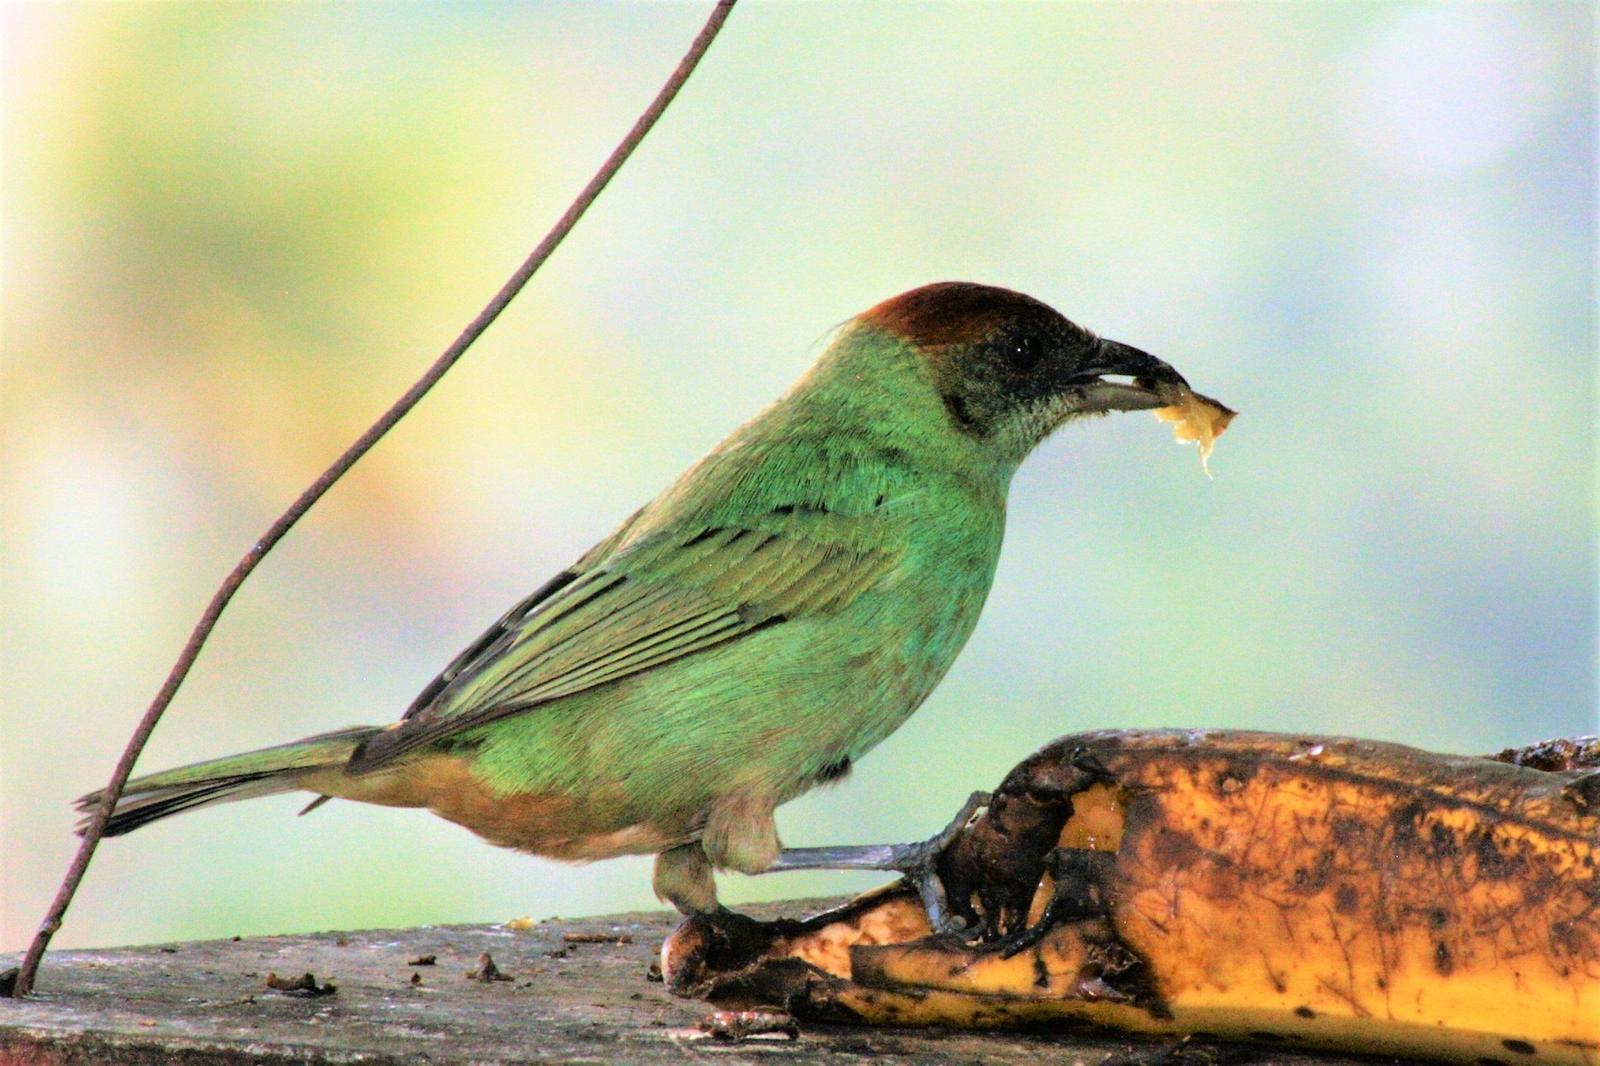 Lesser Antillean Tanager Photo by Bela Brown